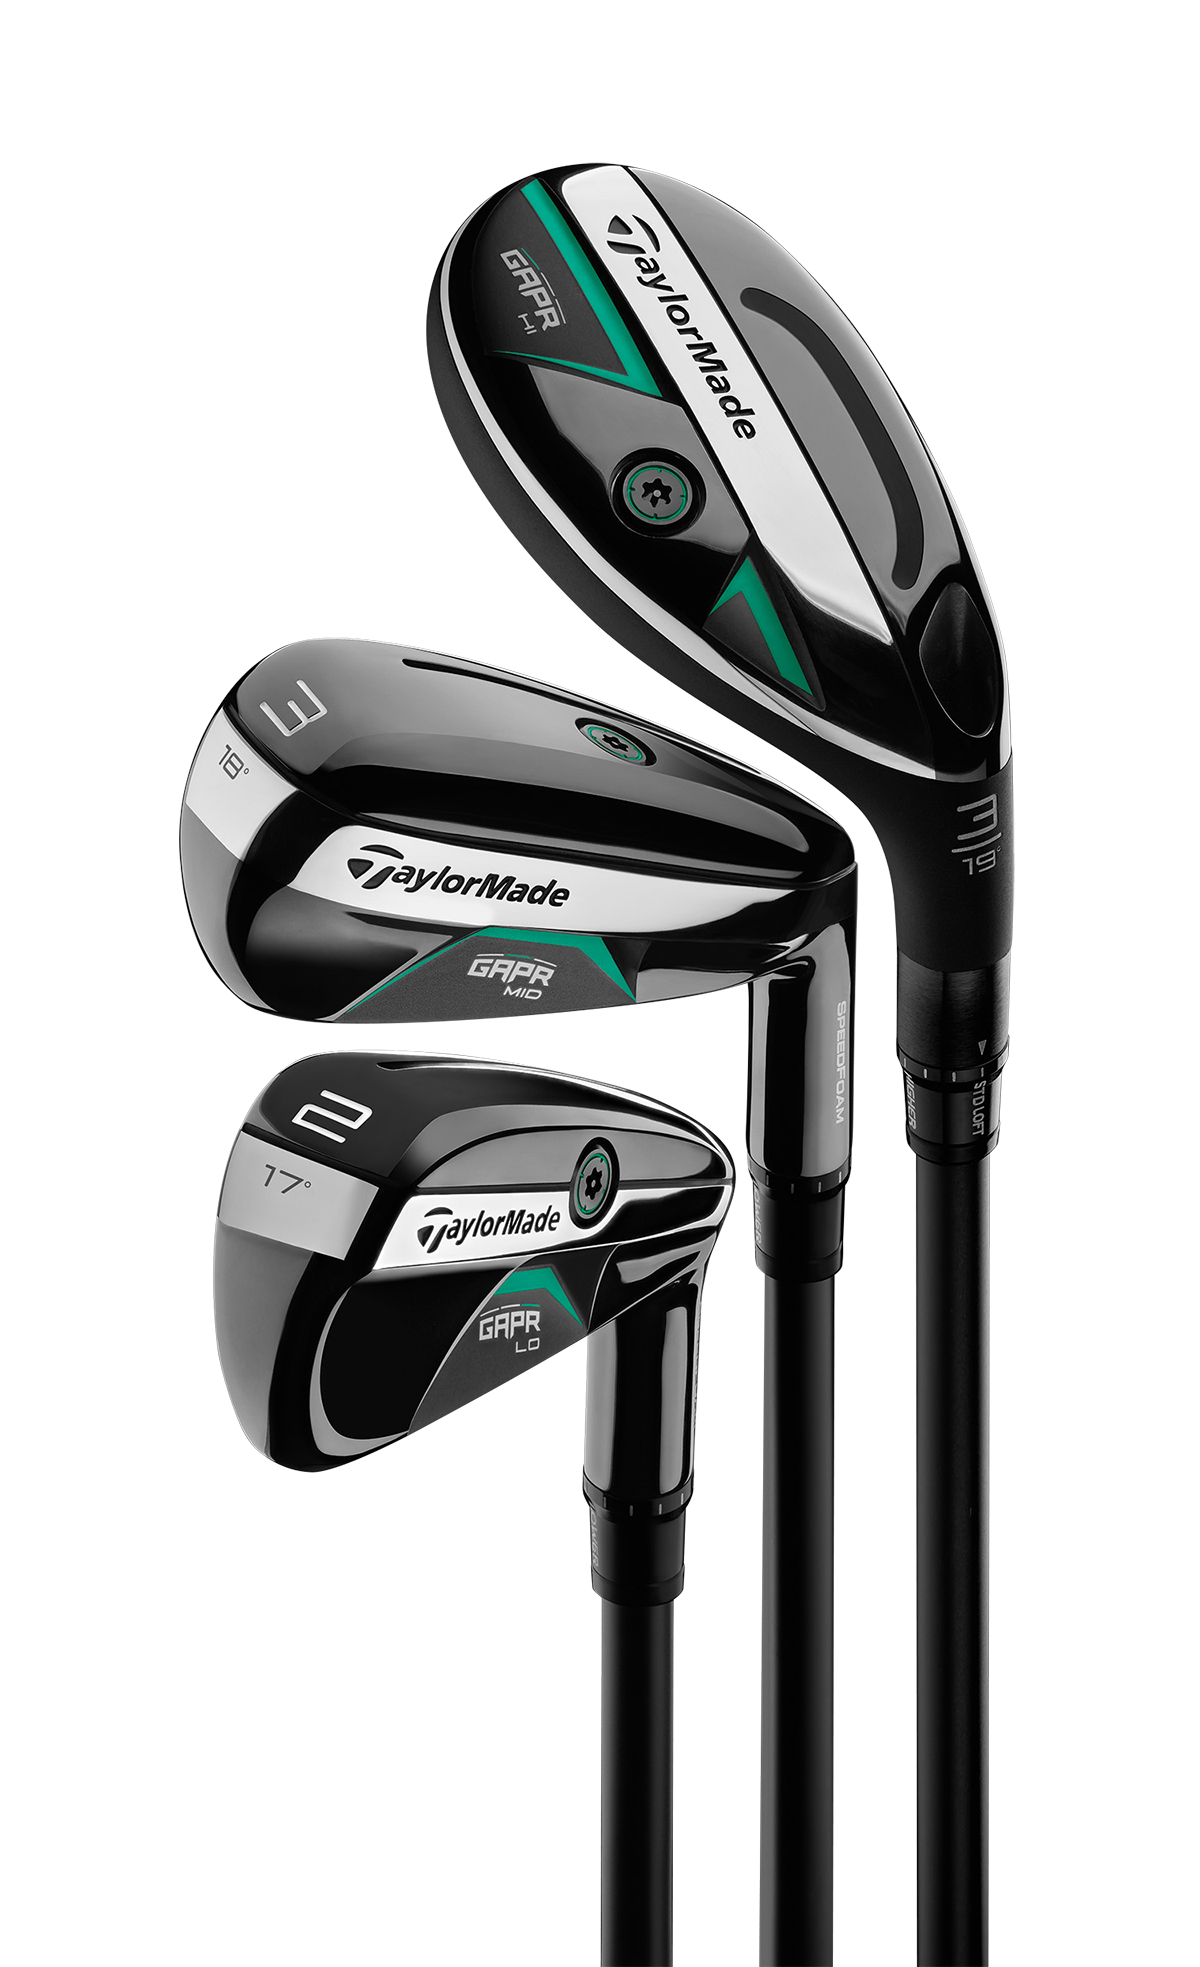 TaylorMade GAPR Hybrids - group of all three clubs